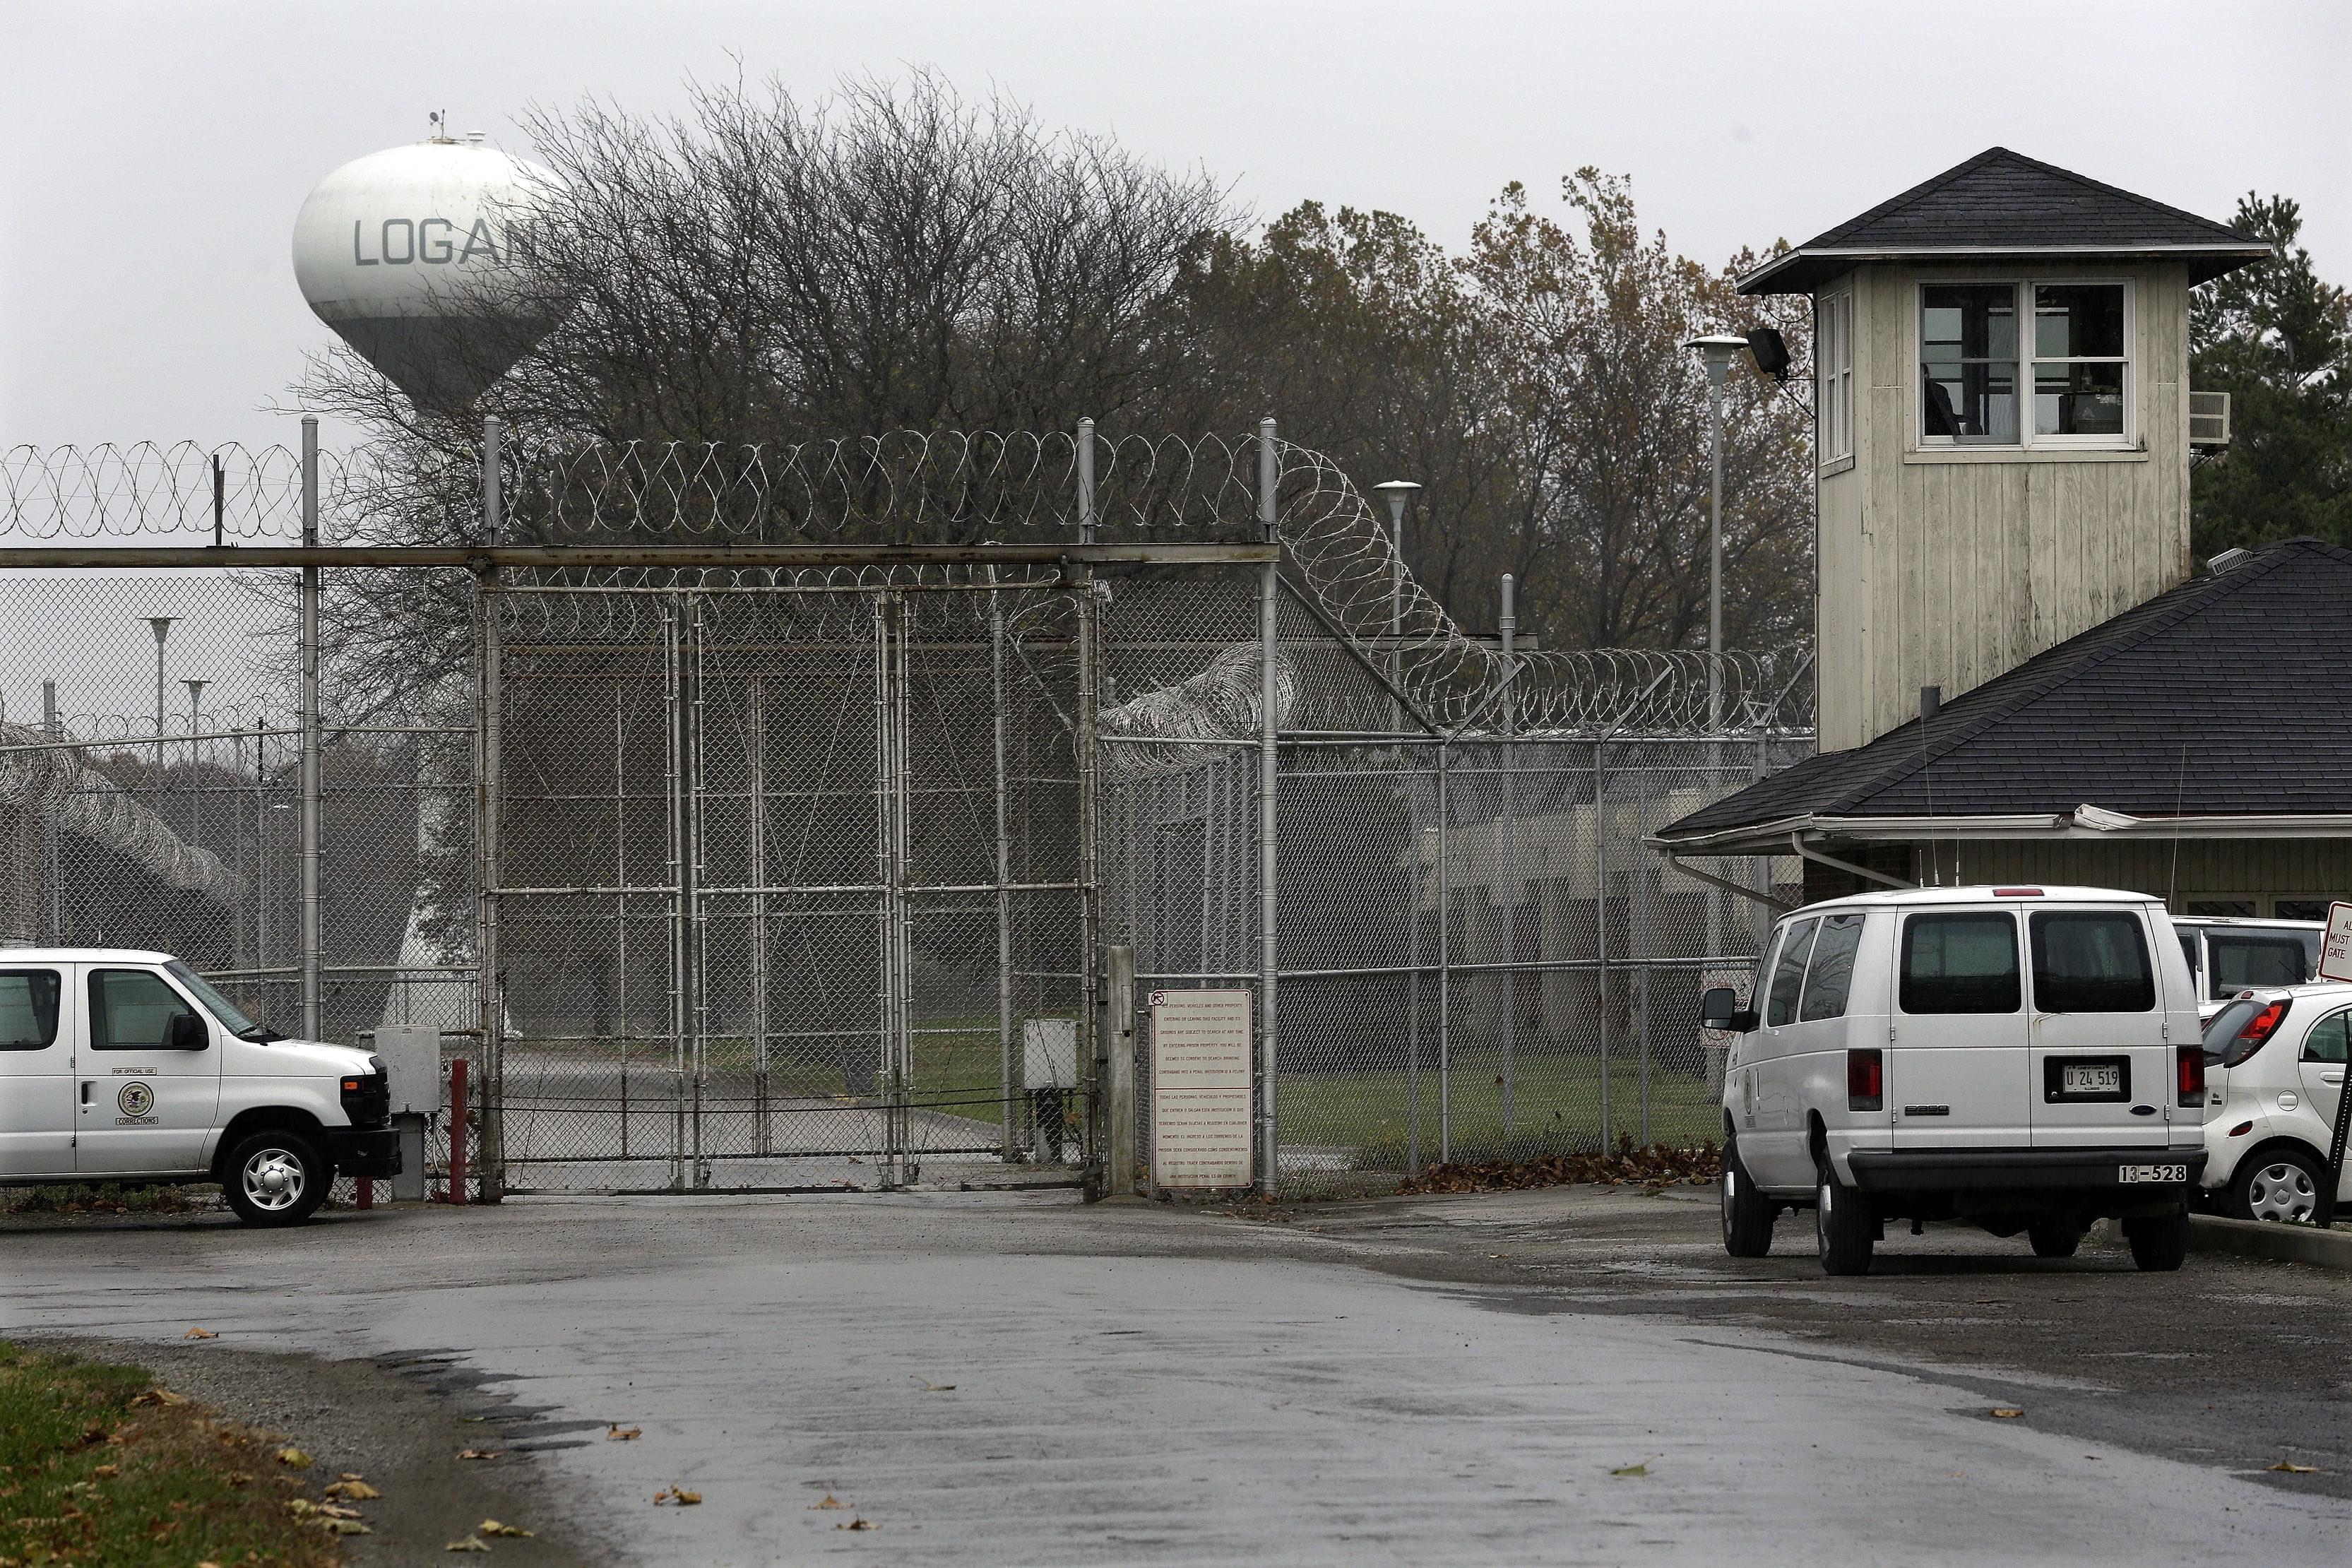 Security fences surround the Logan Correctional Center Friday, Nov. 18, 2016, in Lincoln, Ill